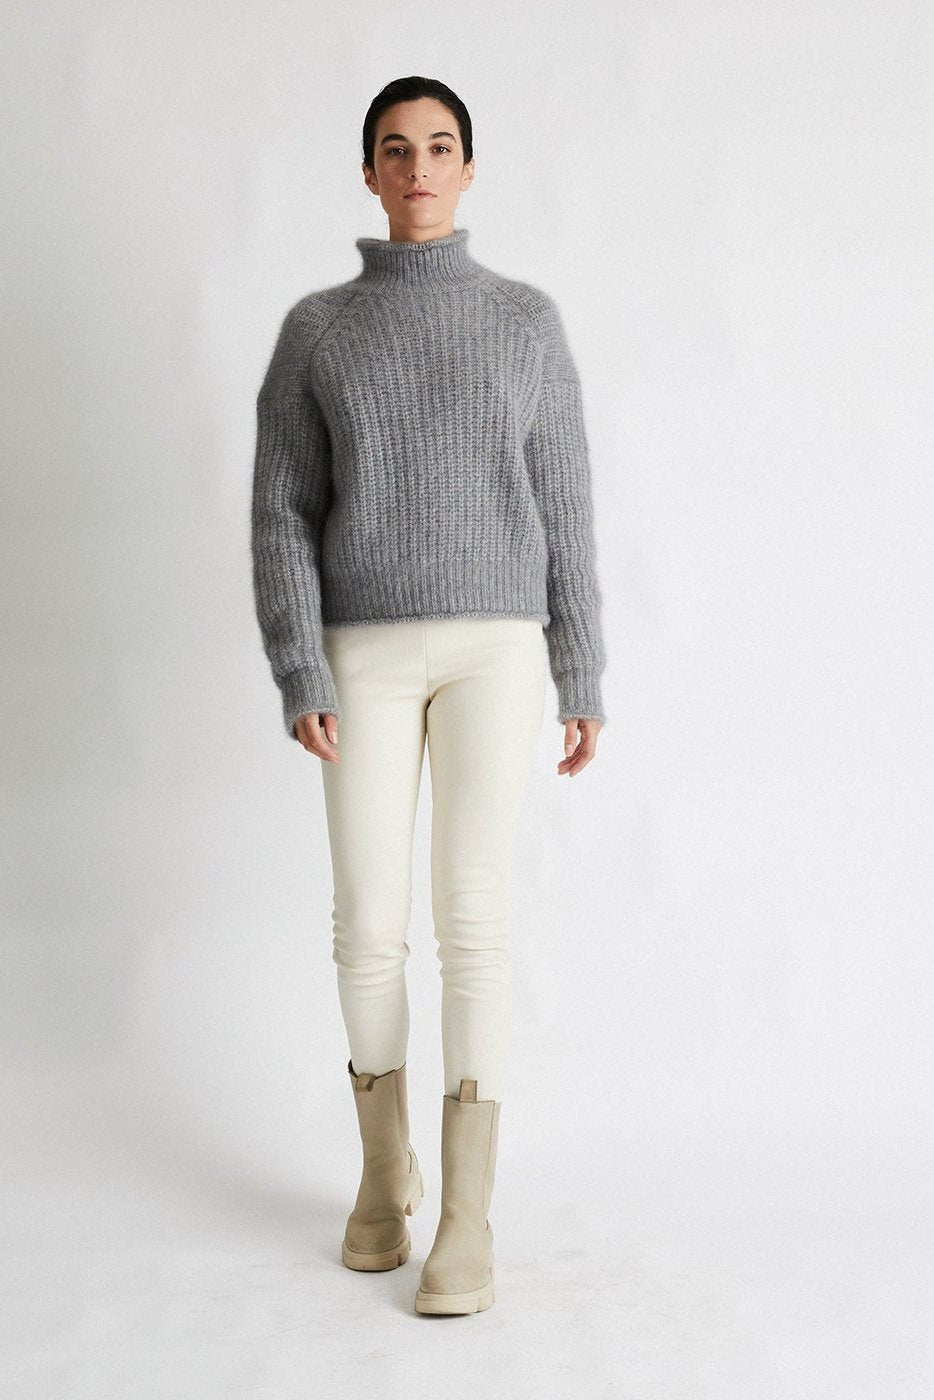 +Beryll Cashmere Sweater Carole | Pebble Gray - +Beryll Cashmere Sweater Carole | Pebble Gray - +Beryll Worn By Good People